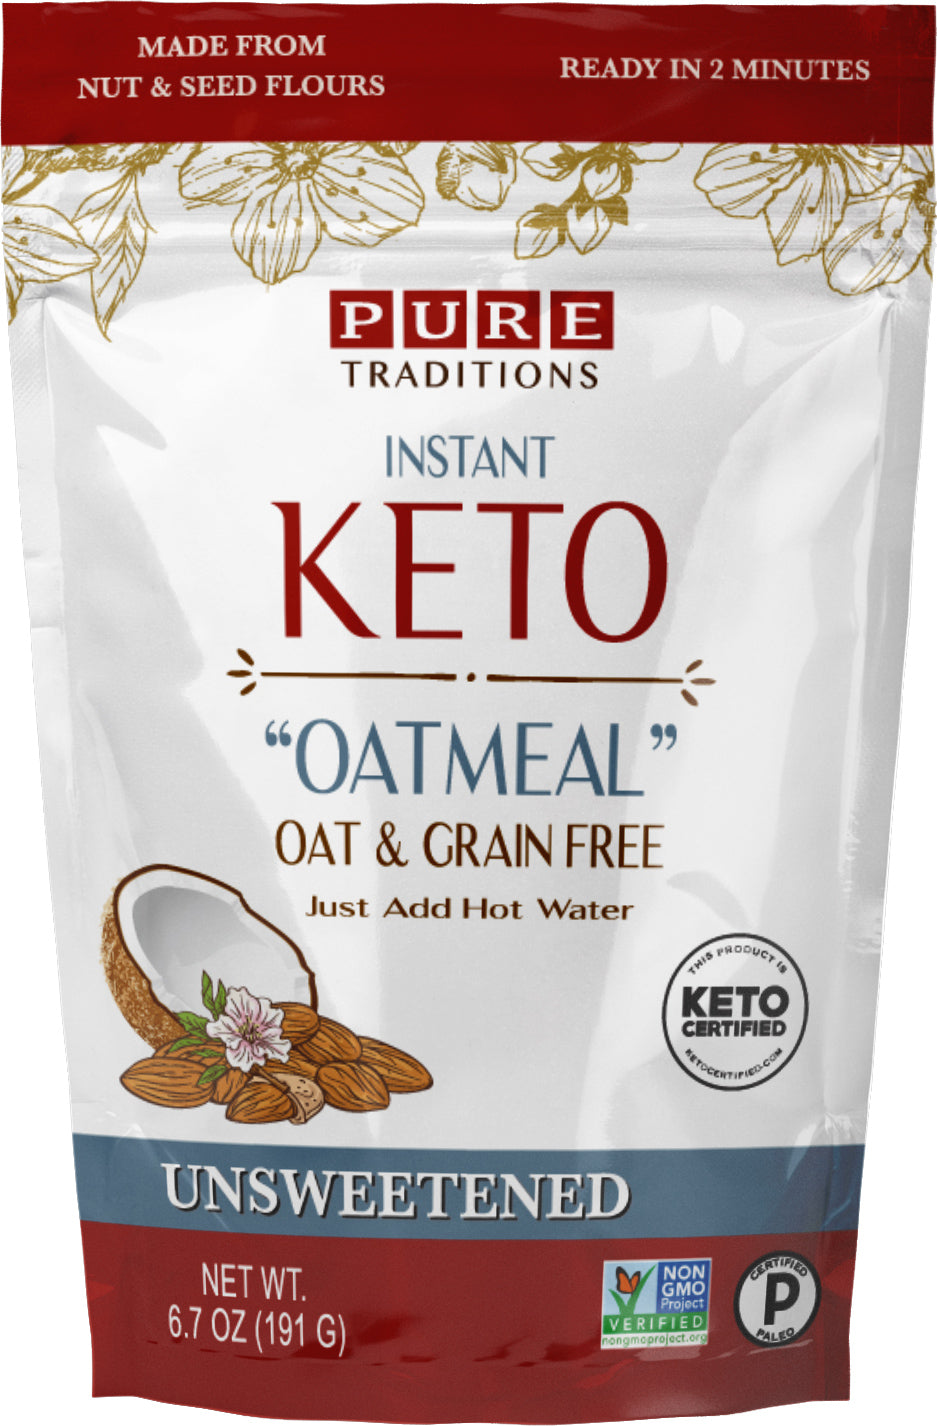 Instant Keto Oatmeal, Unsweetened (2 Net Carbs/Serving)